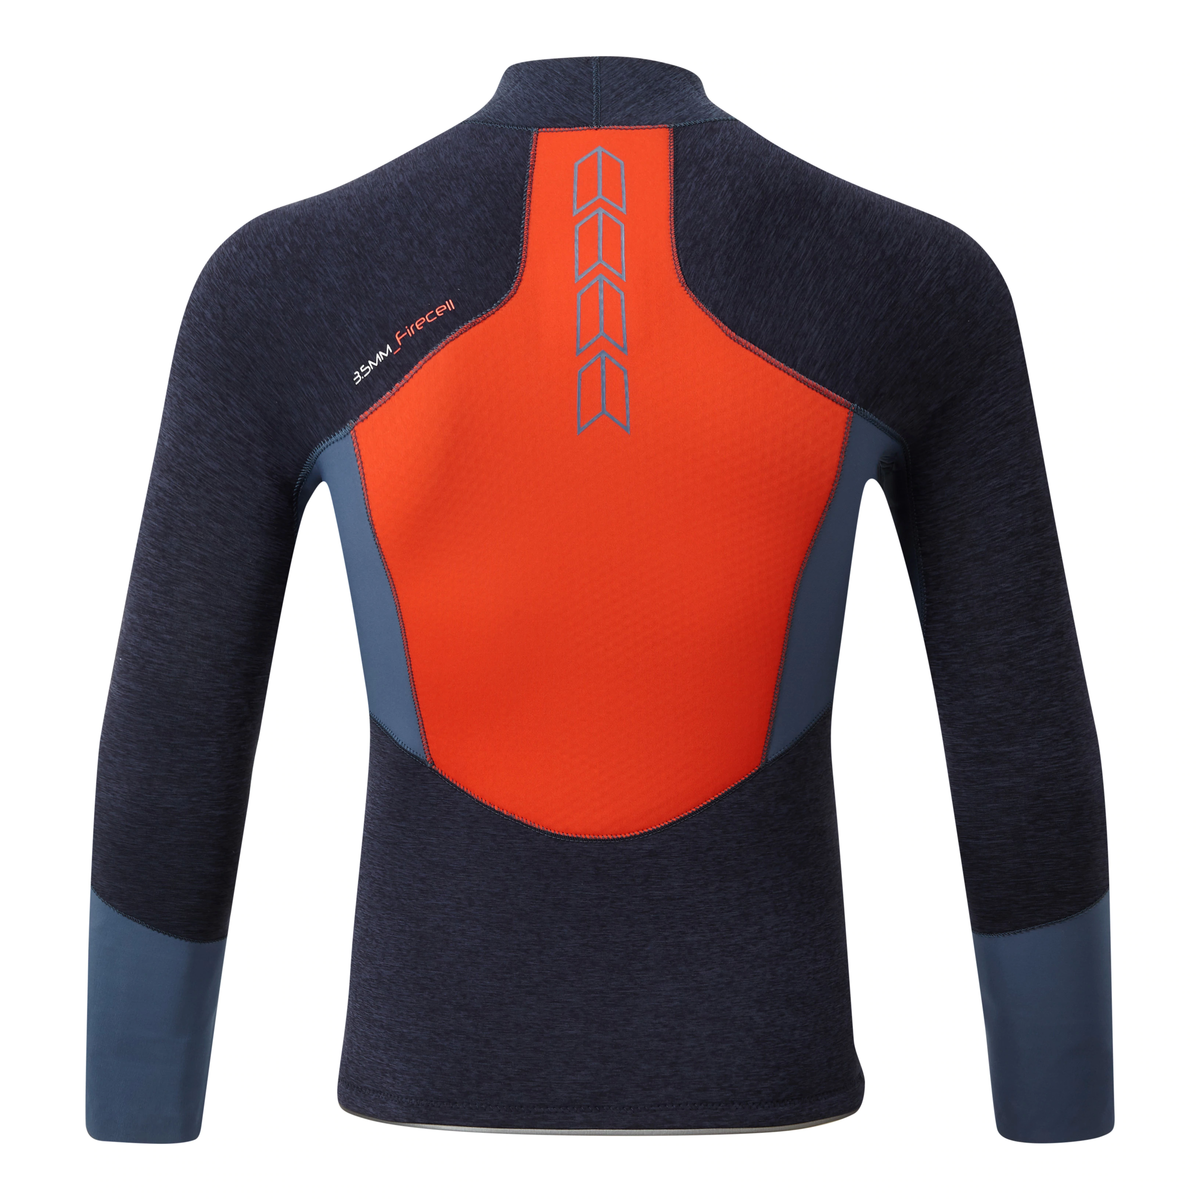 Gill Race FireCell Top 3.5 mm wetsuit top blauw kinder